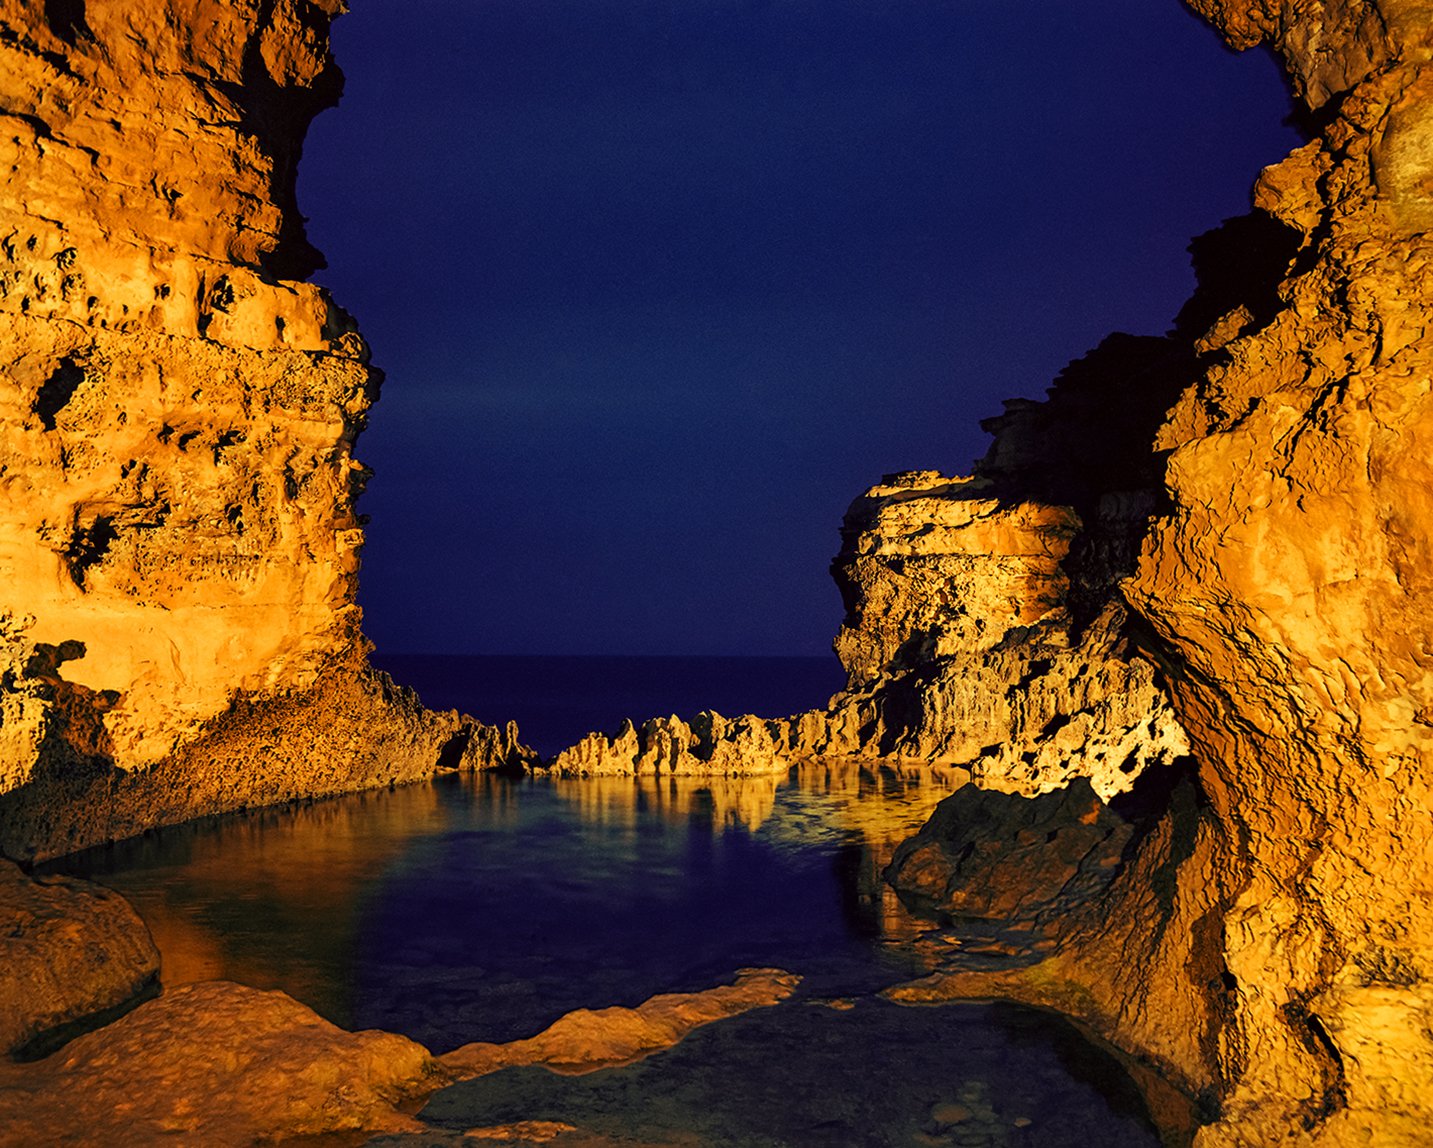    Land of Time     The Grotto  1981  (Great Ocean Road, Victoria) Print size variable 